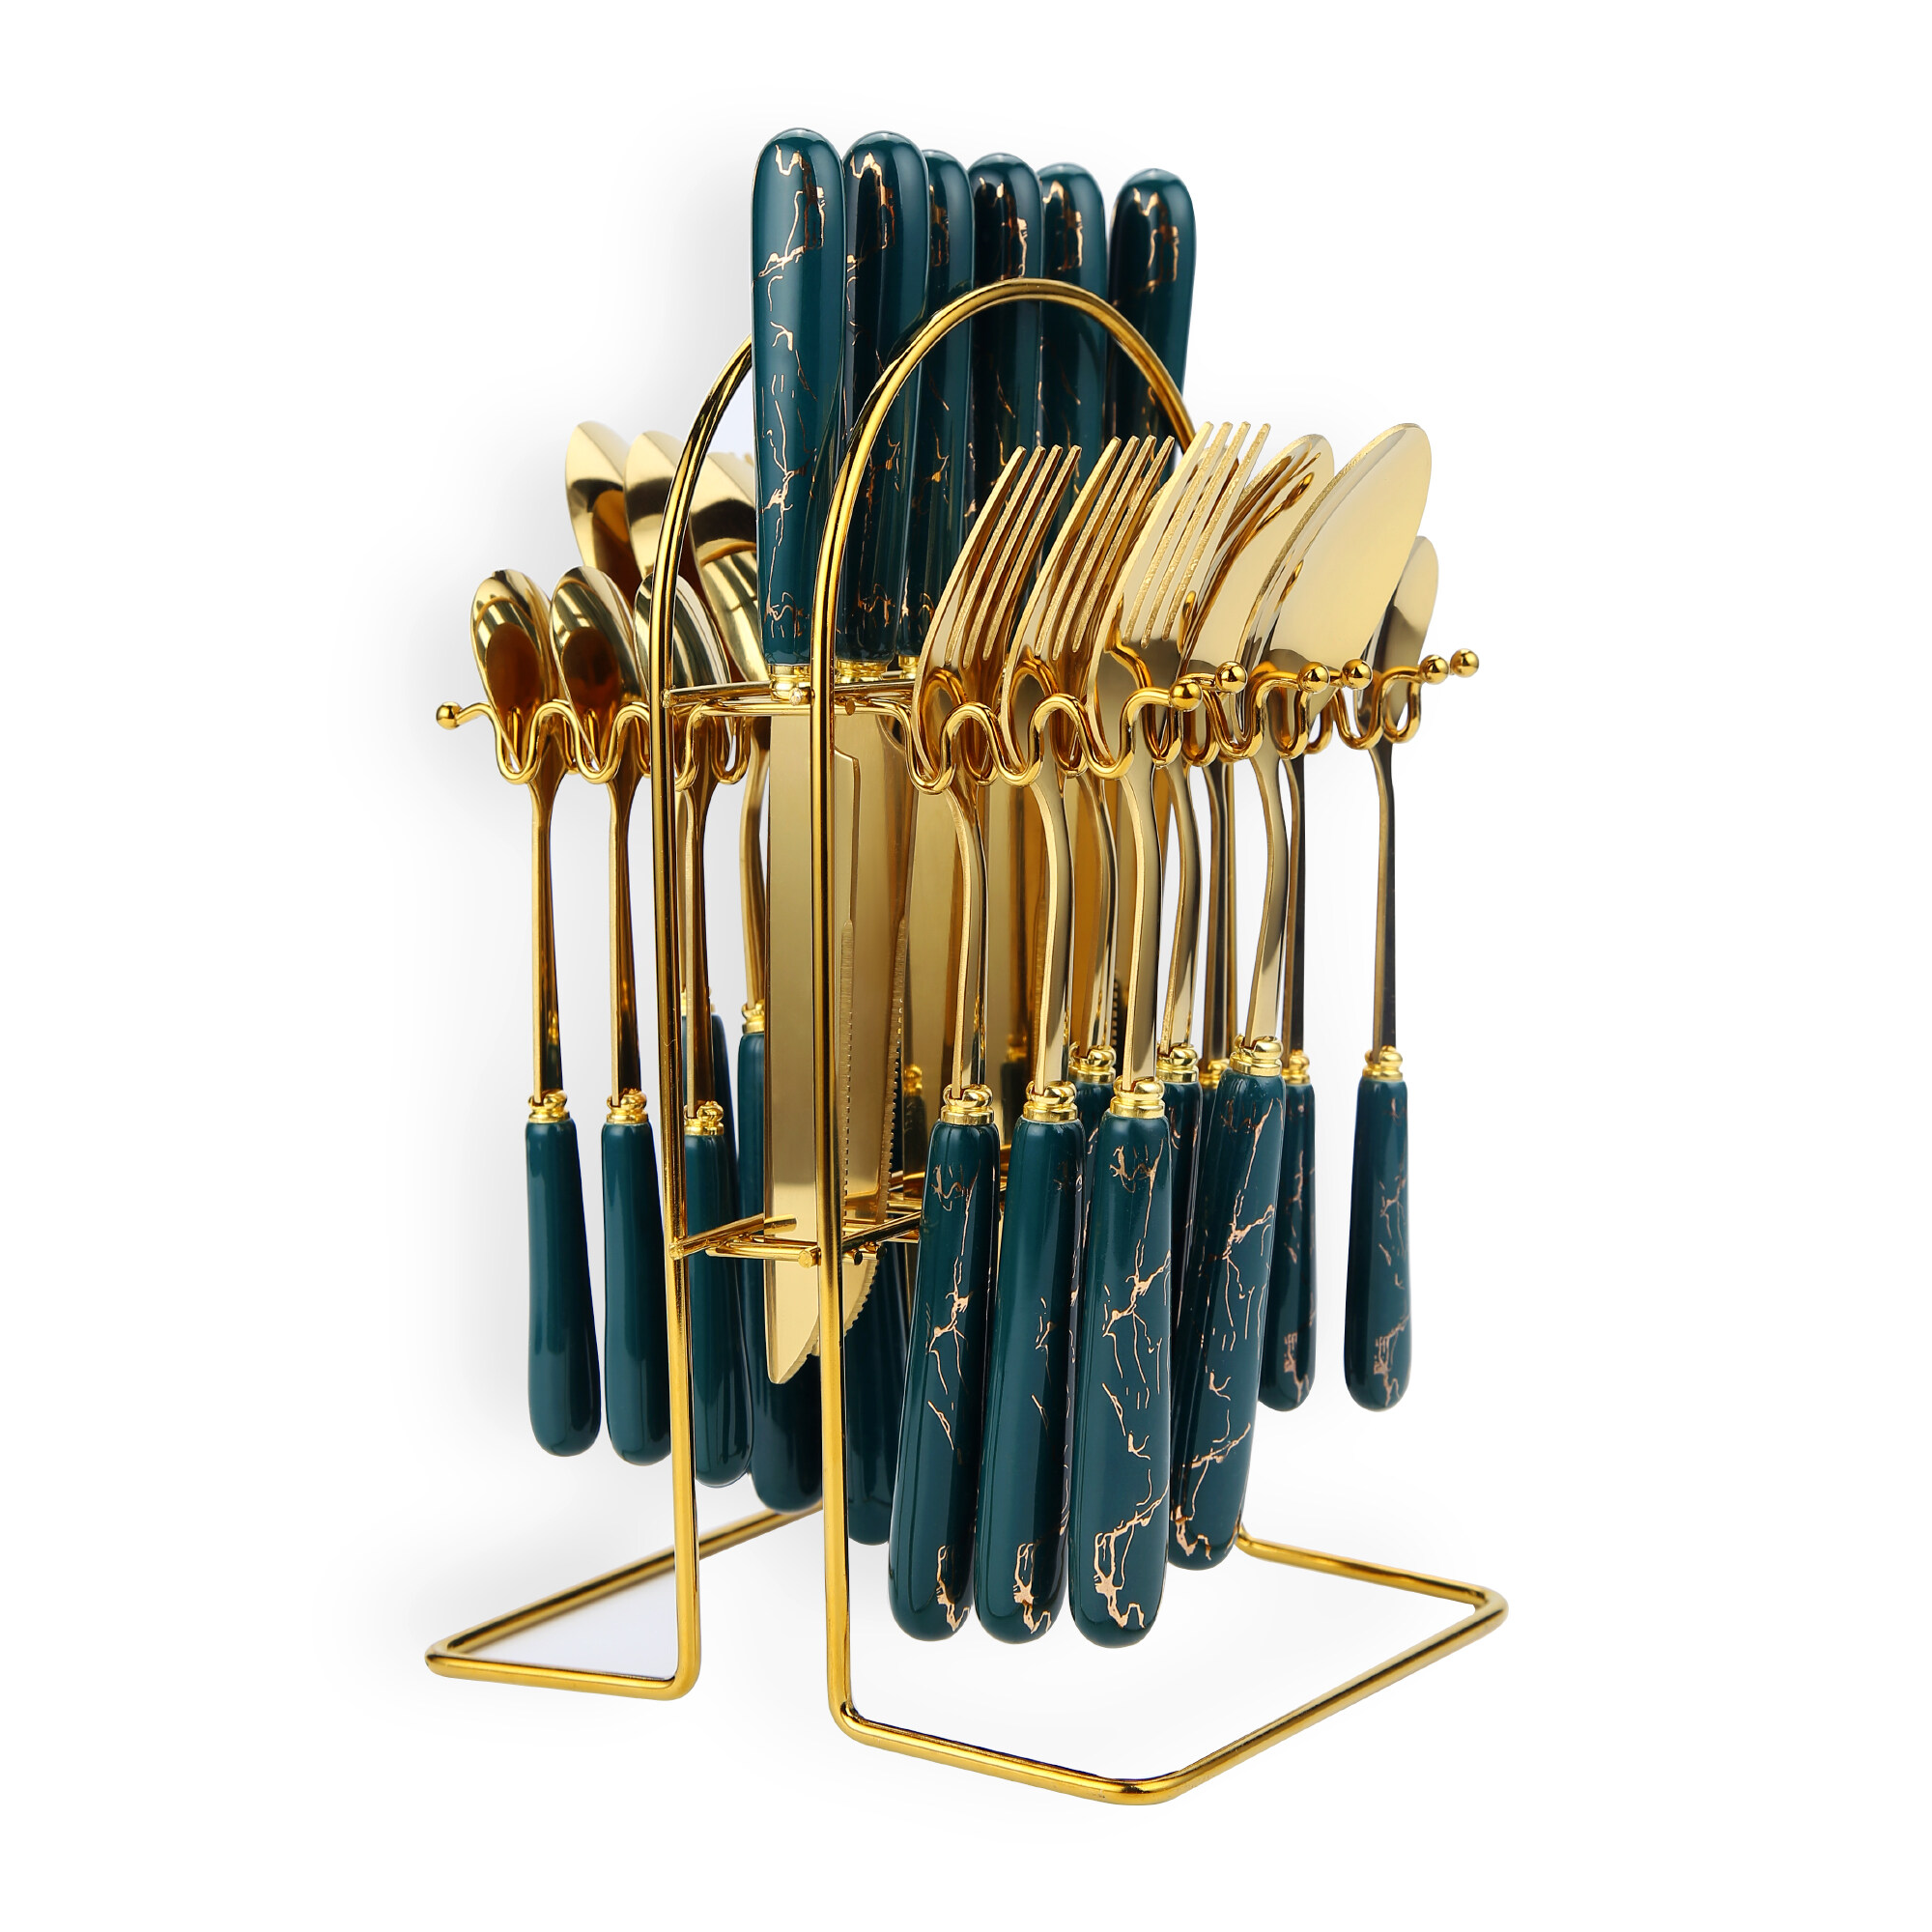 24-Piece Stainless Steel Cutlery Set With Stand Green/Gold